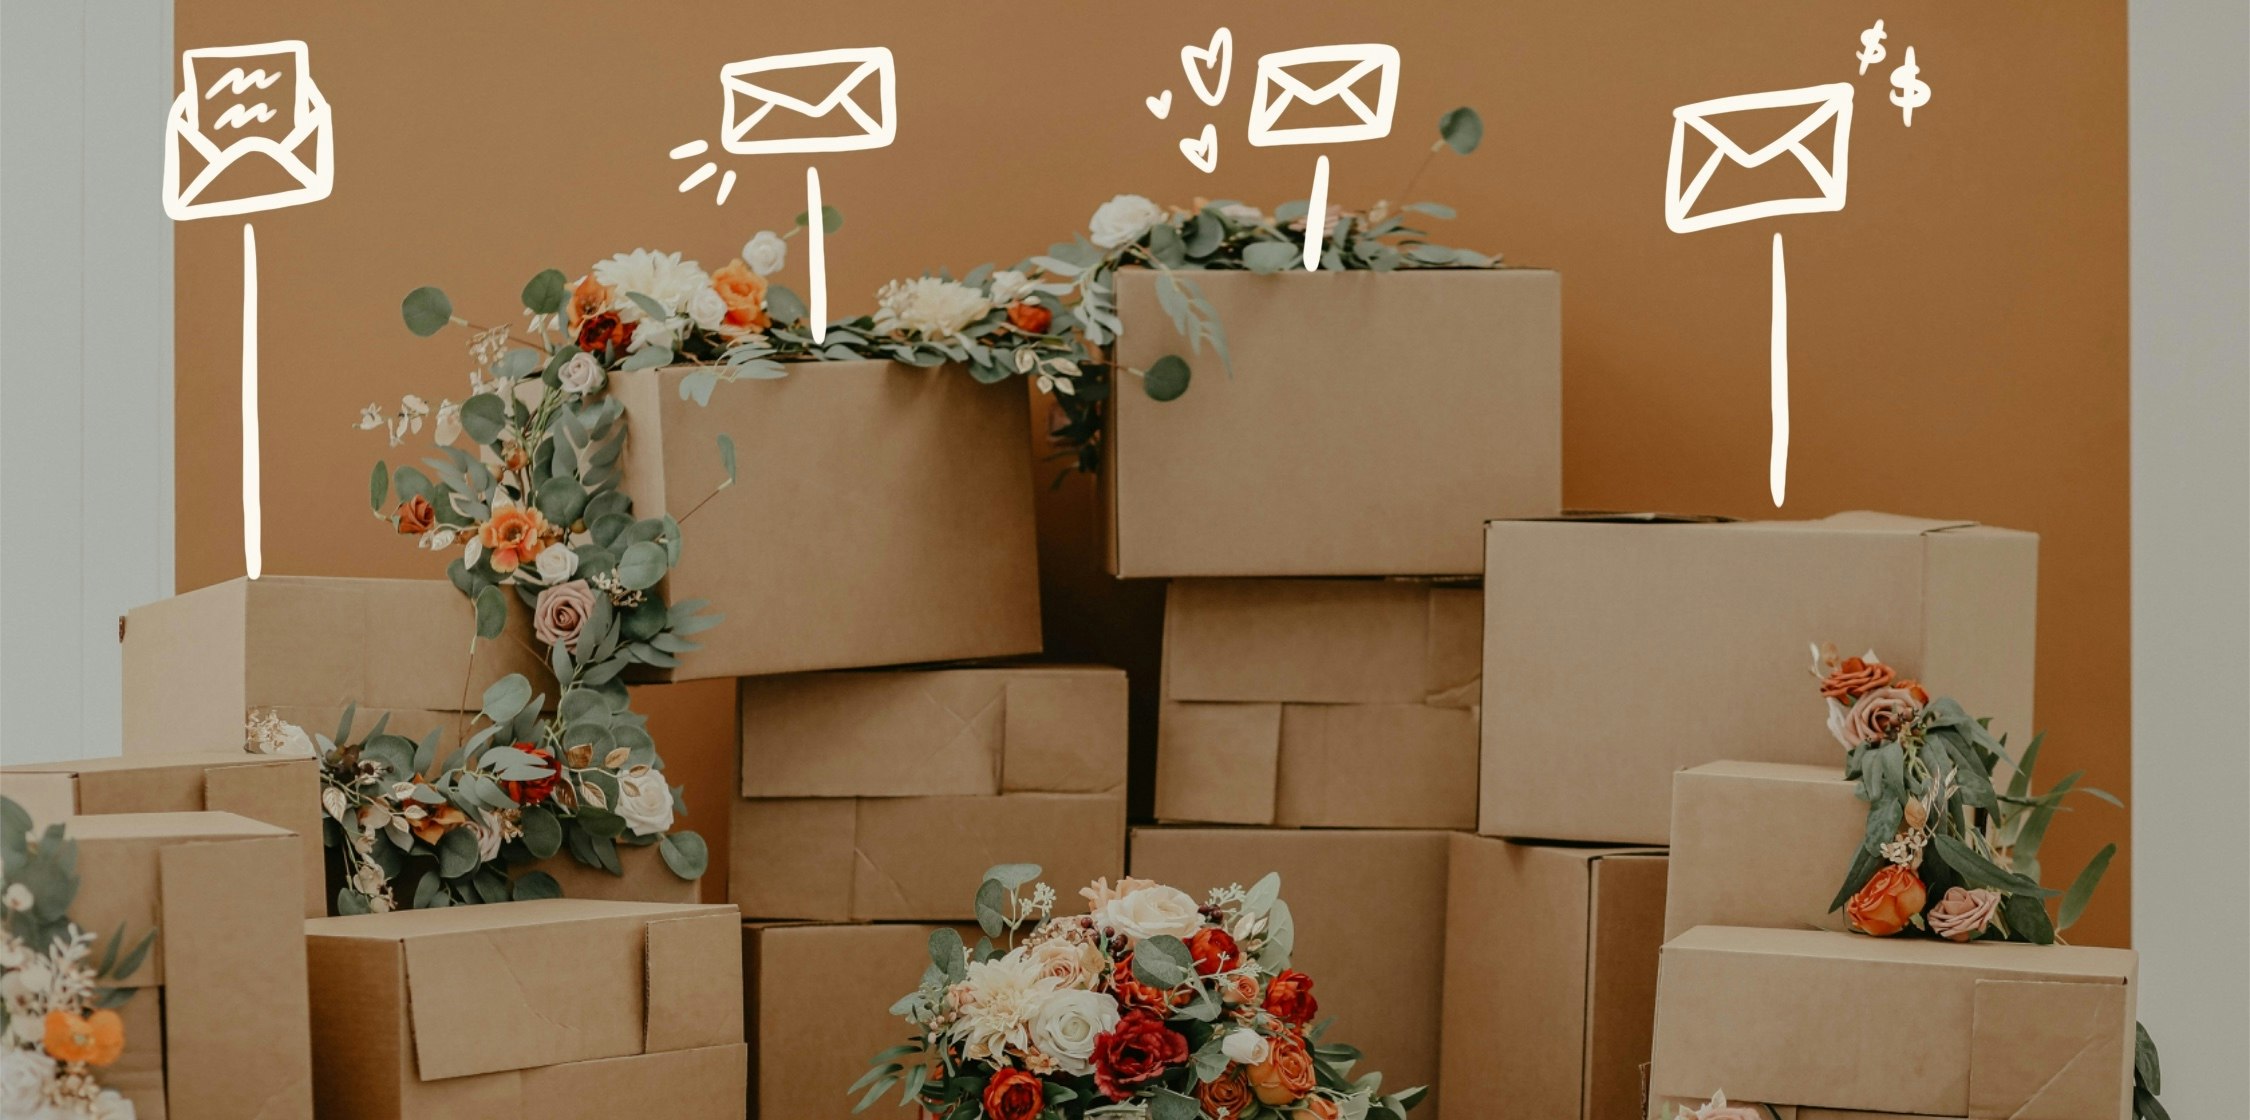 6 Ways to Nurture Email Leads After the Holiday Rush